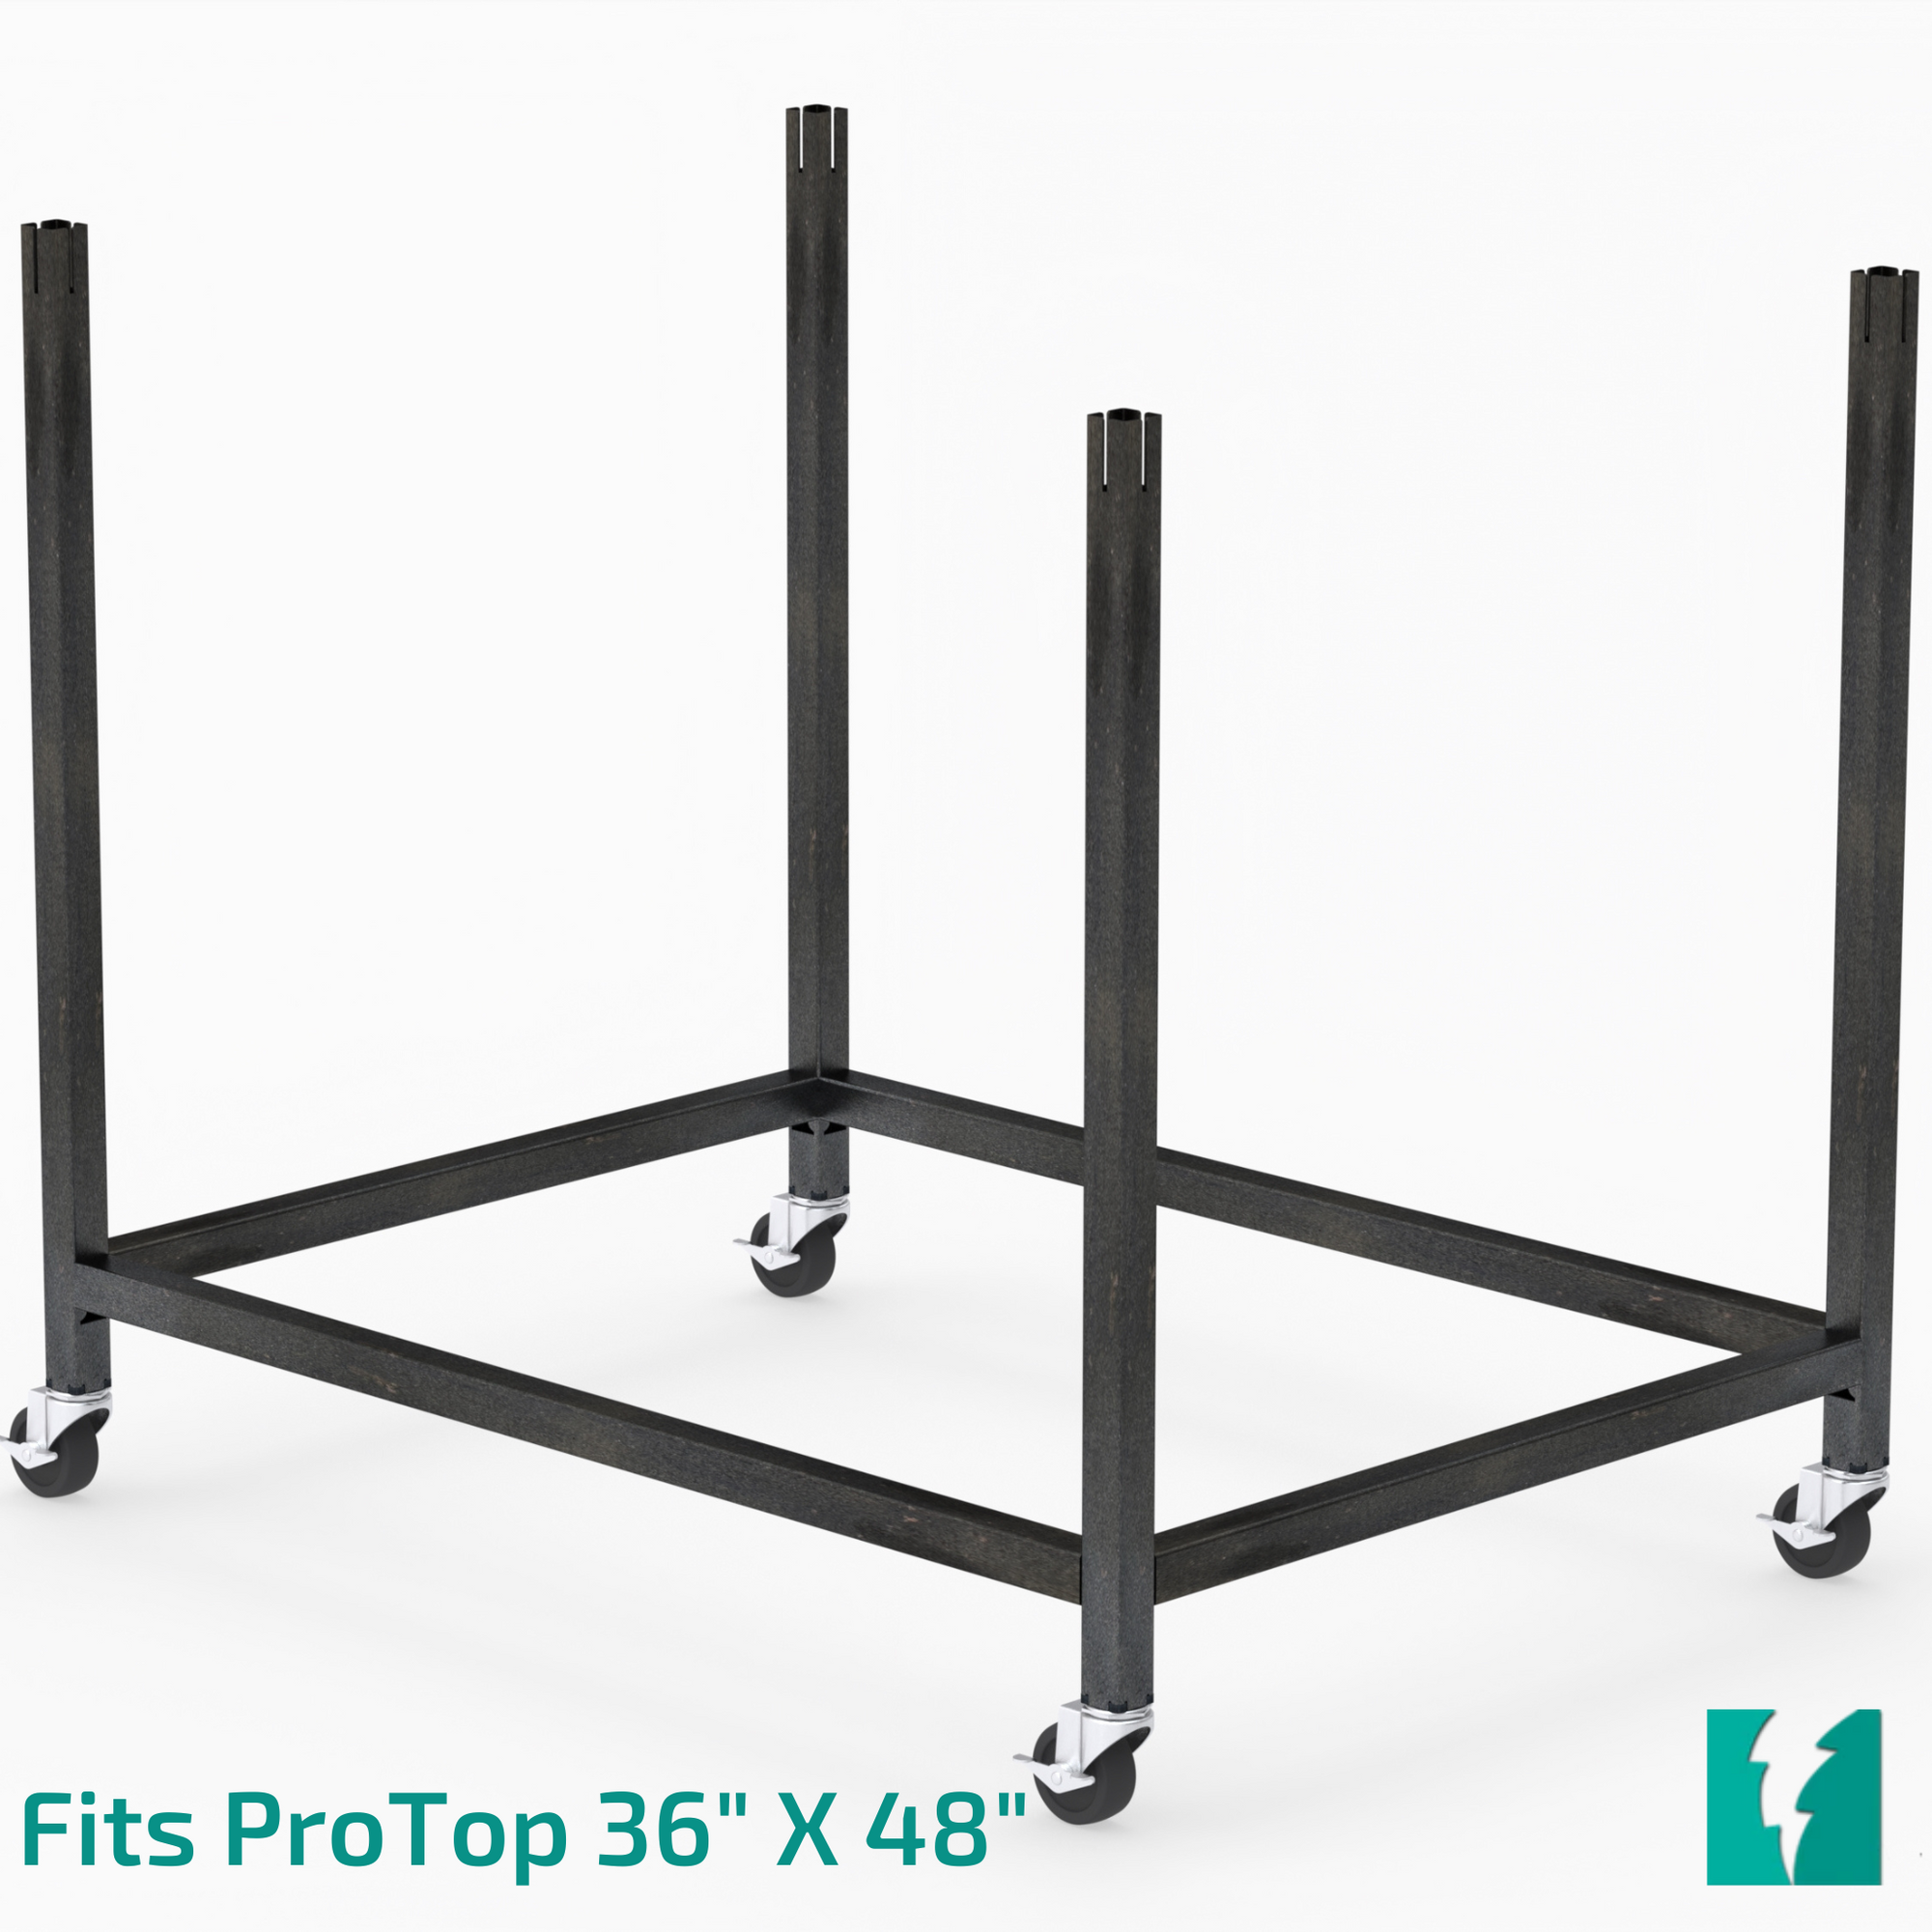 CertiFlat ProTop Leg Kit 36" X 48", LK3648 with Casters by Tab & Slot, CNC Tube Laser, CNC Tube Laser Leg Kit, LK3648